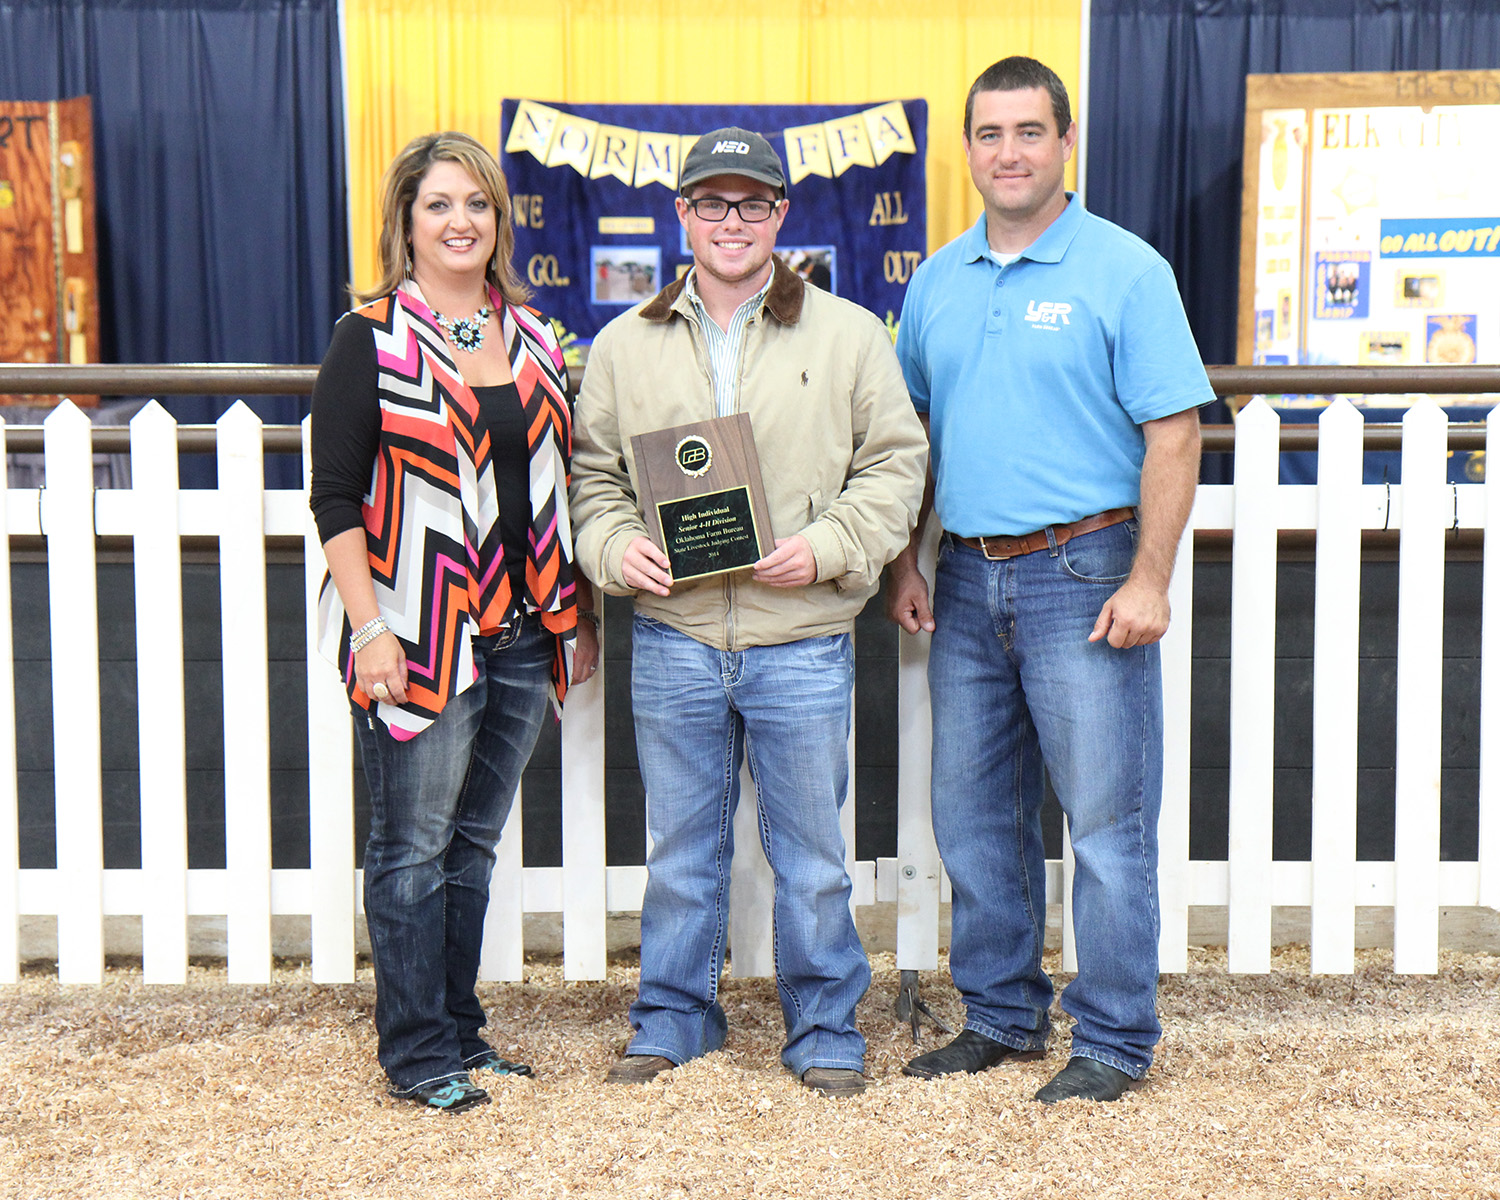 Pictures of 2014 Oklahoma State Fair Livestock Judging Winners